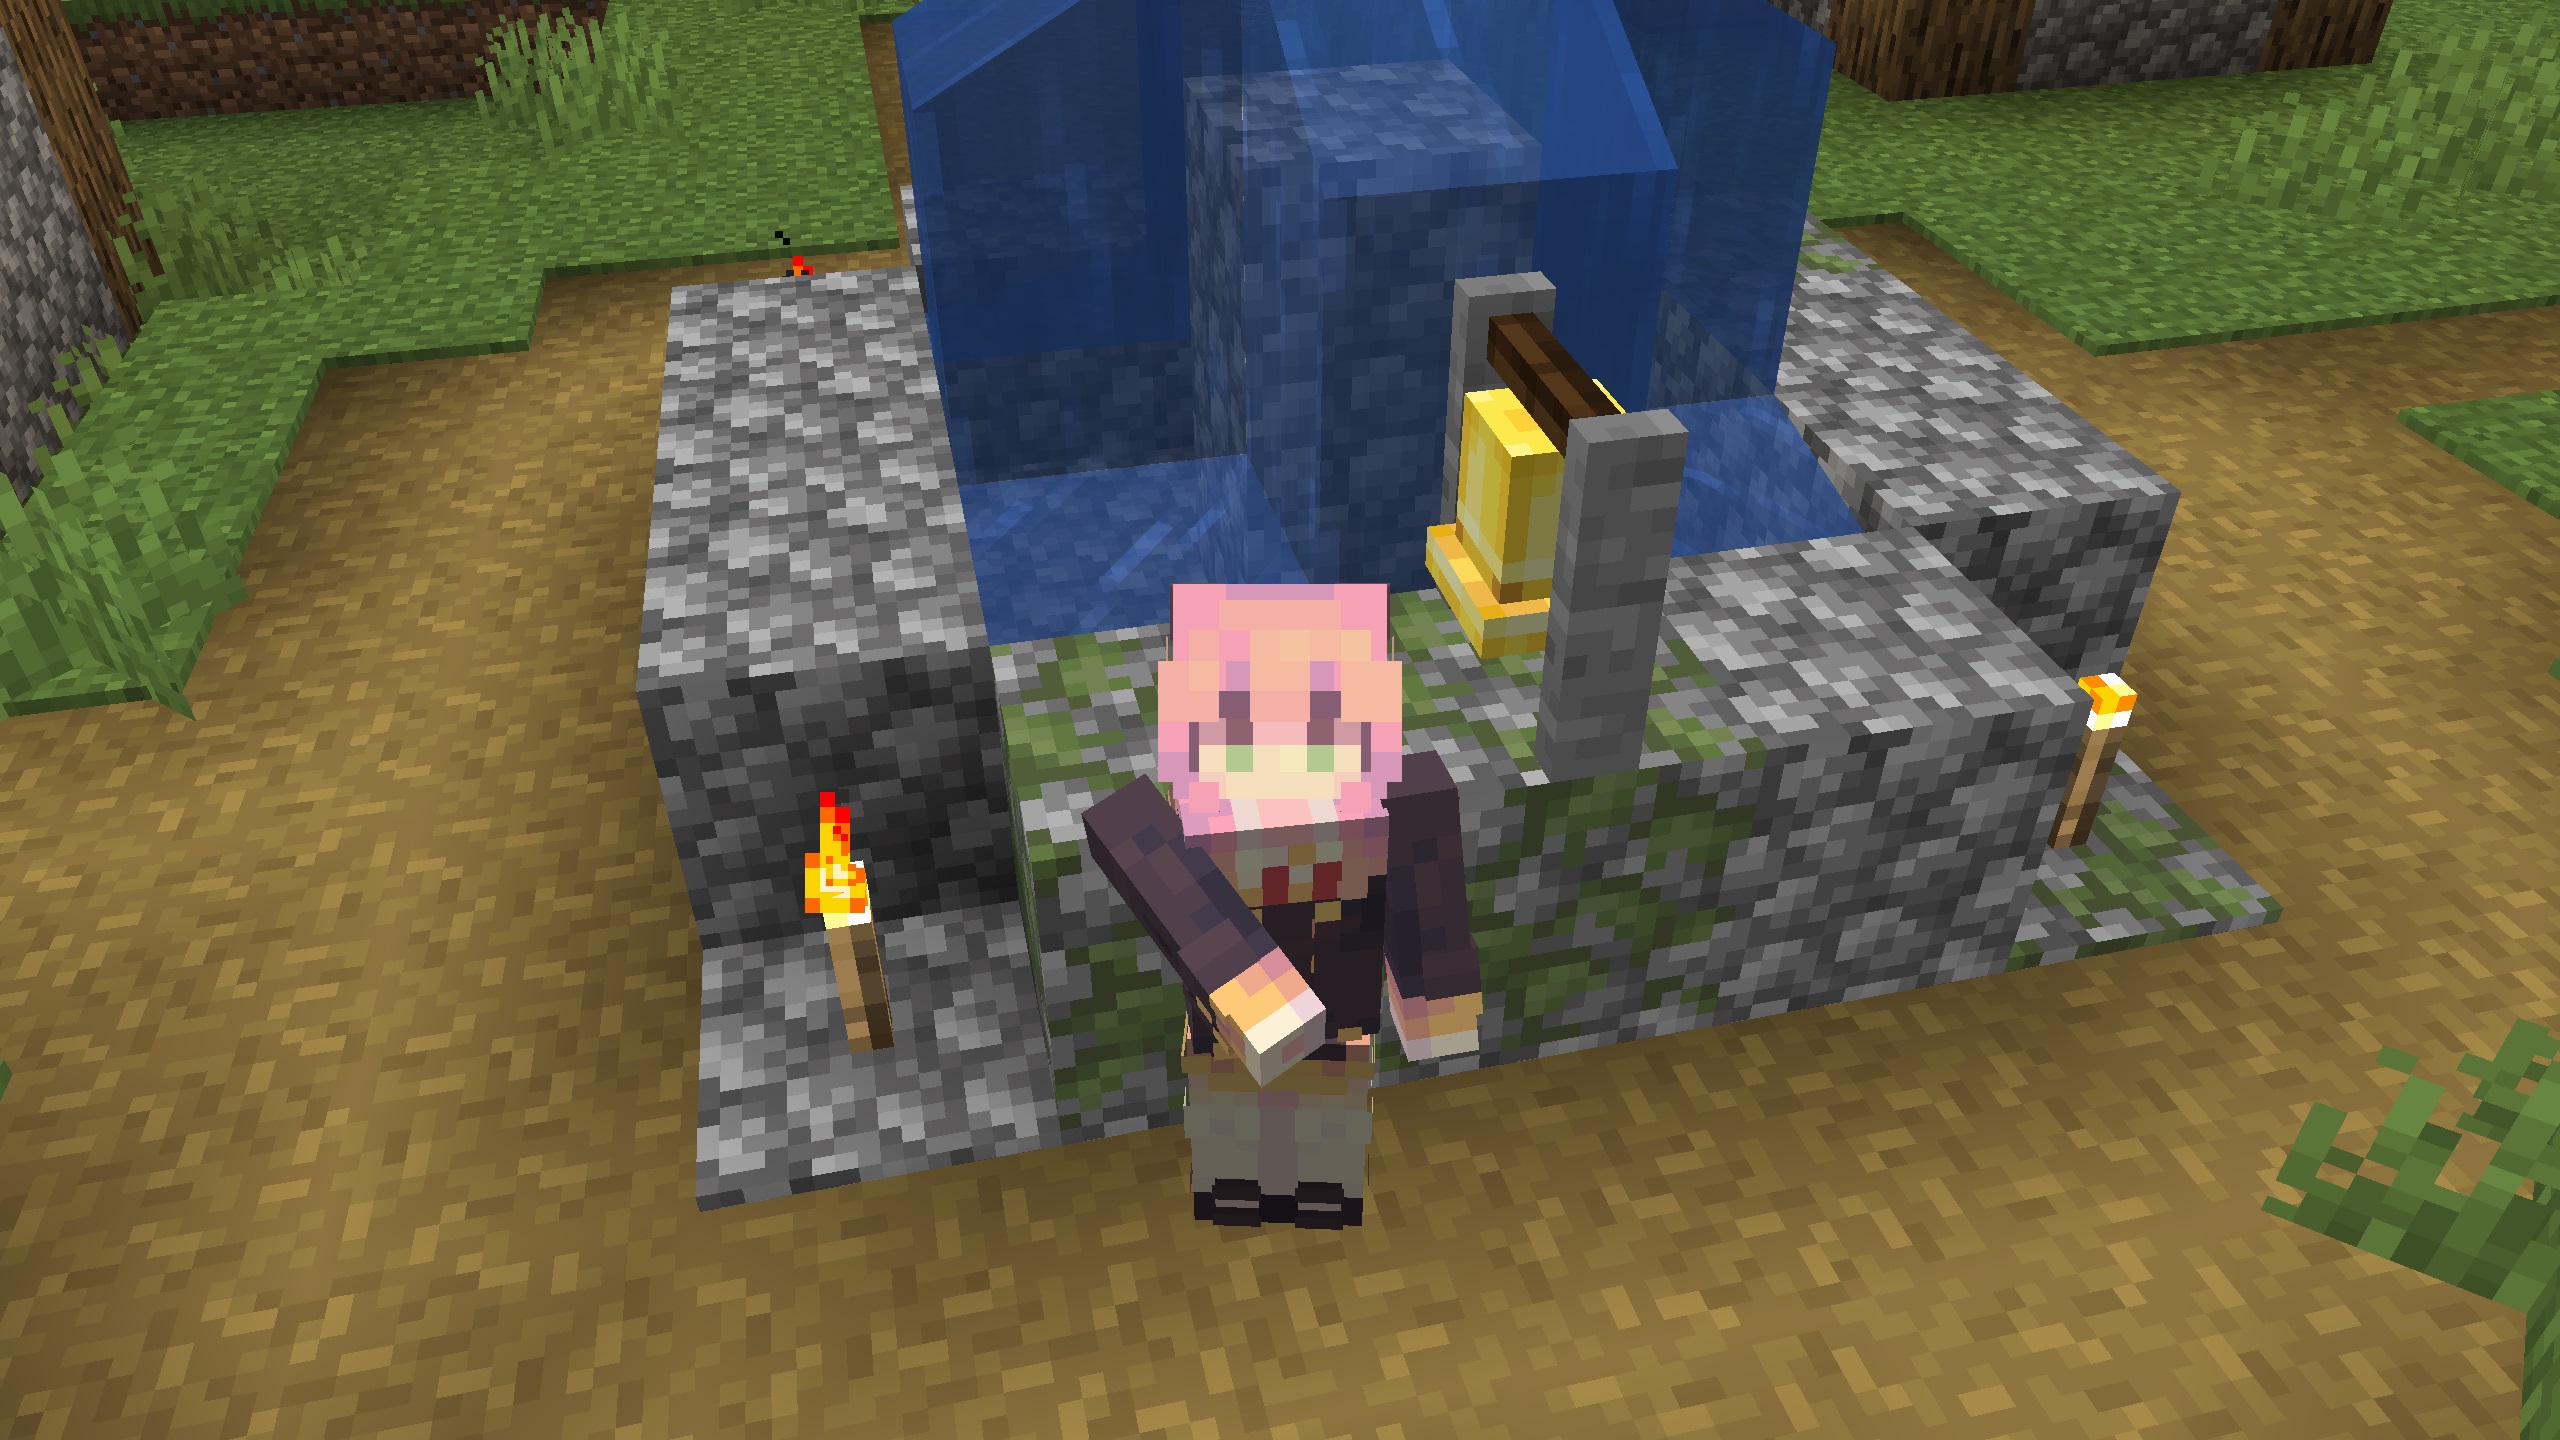 Minecraft skin -Anya Forger with pink hair wearing a black and gold school uniform